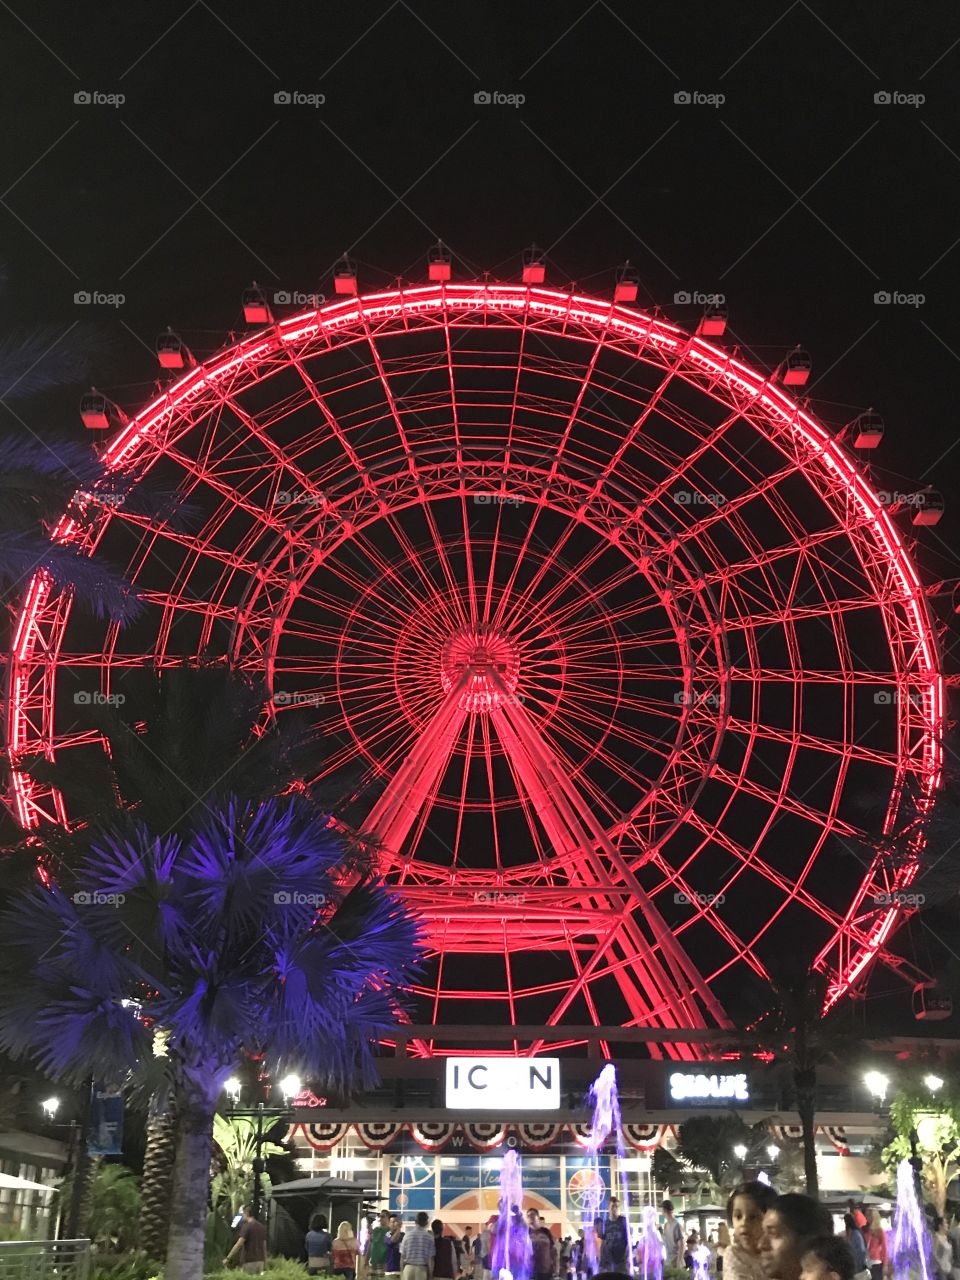 The 6th tallest Ferris wheel in the world, lighted in red.